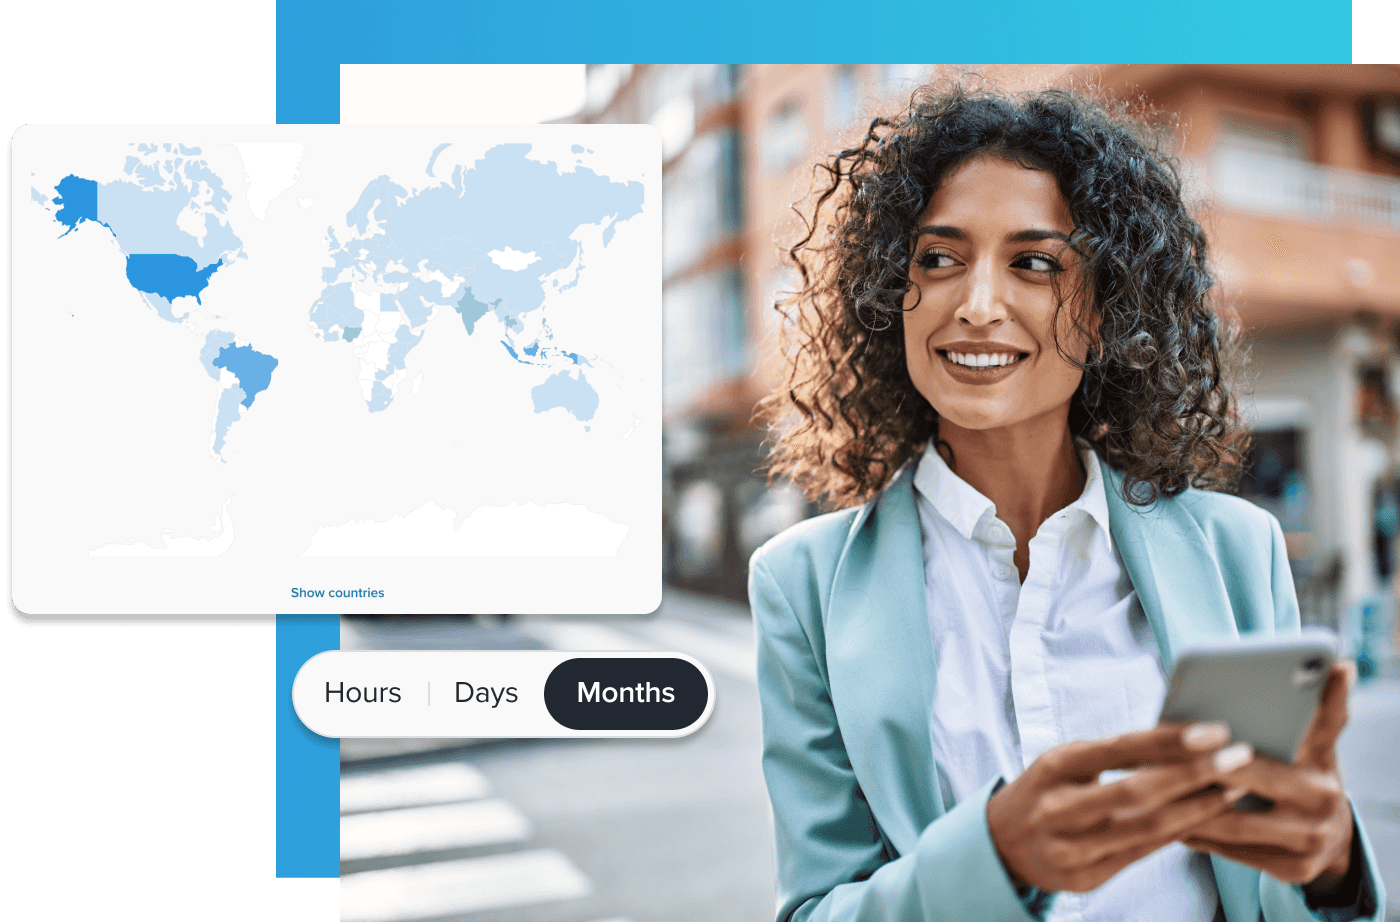 Woman holding a phone and smiling with eyes toward the left, where there’s a global map highlighting some regions and a tab with the option to switch between hours, days, and months.